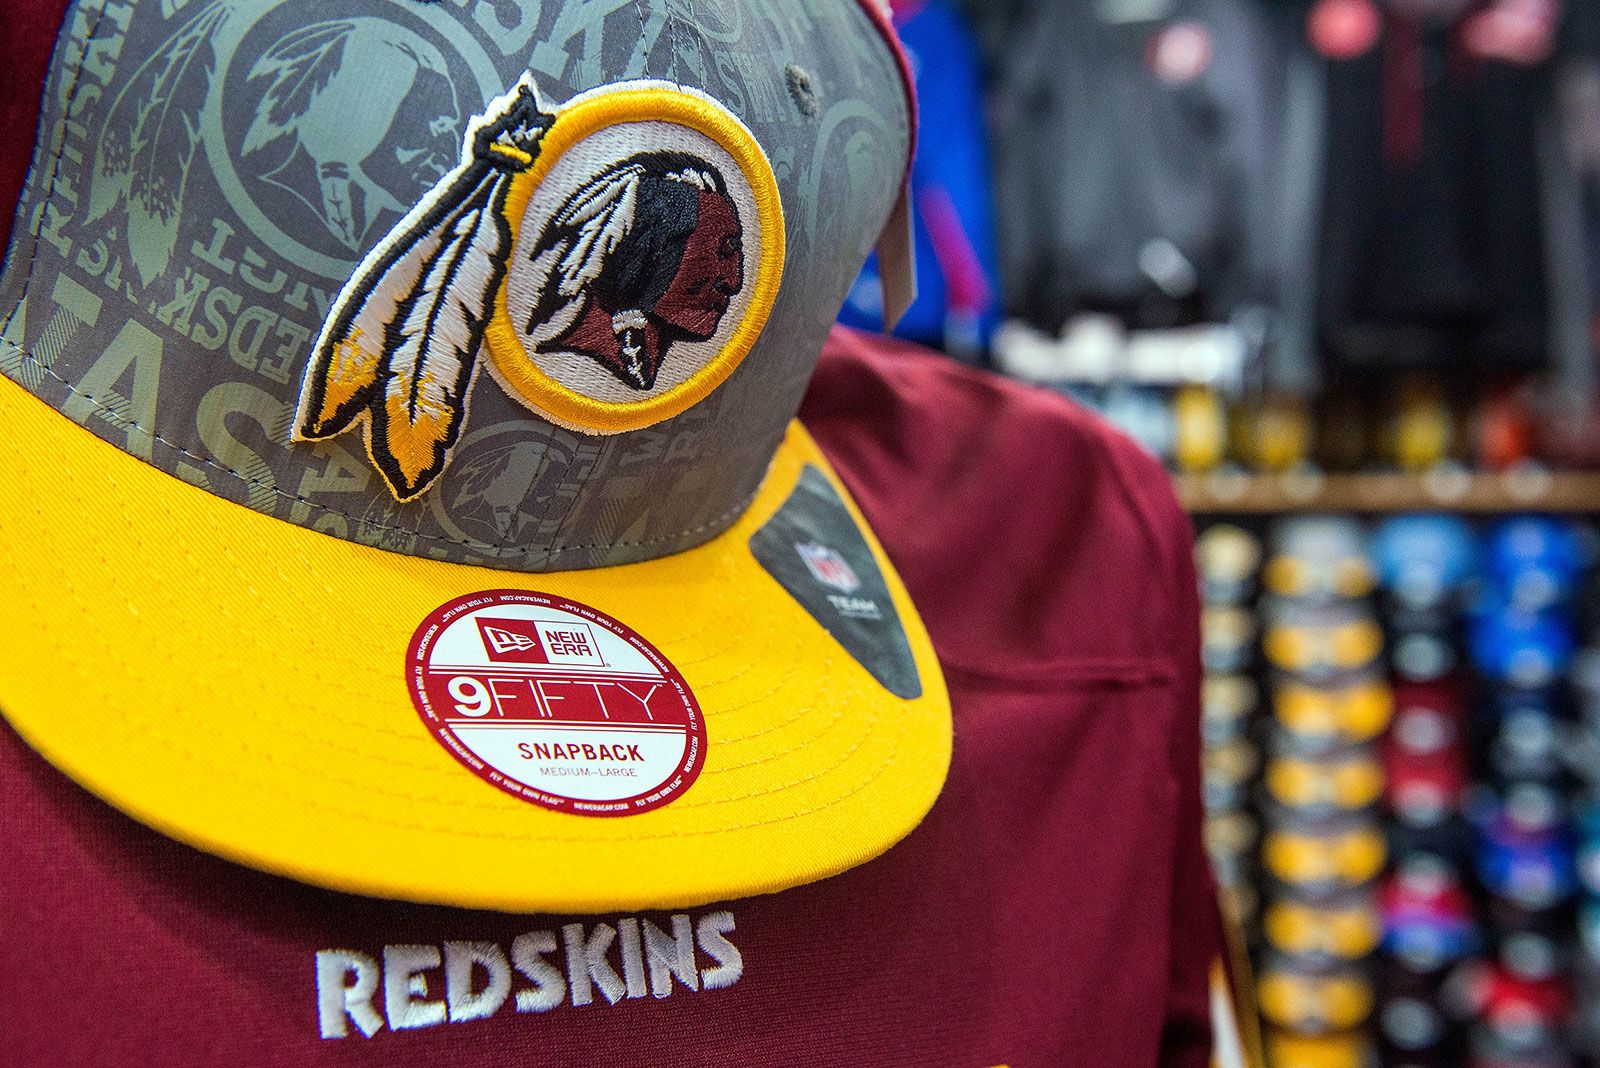 pulls Washington Redskins merchandise from site as calls to change  team name escalate